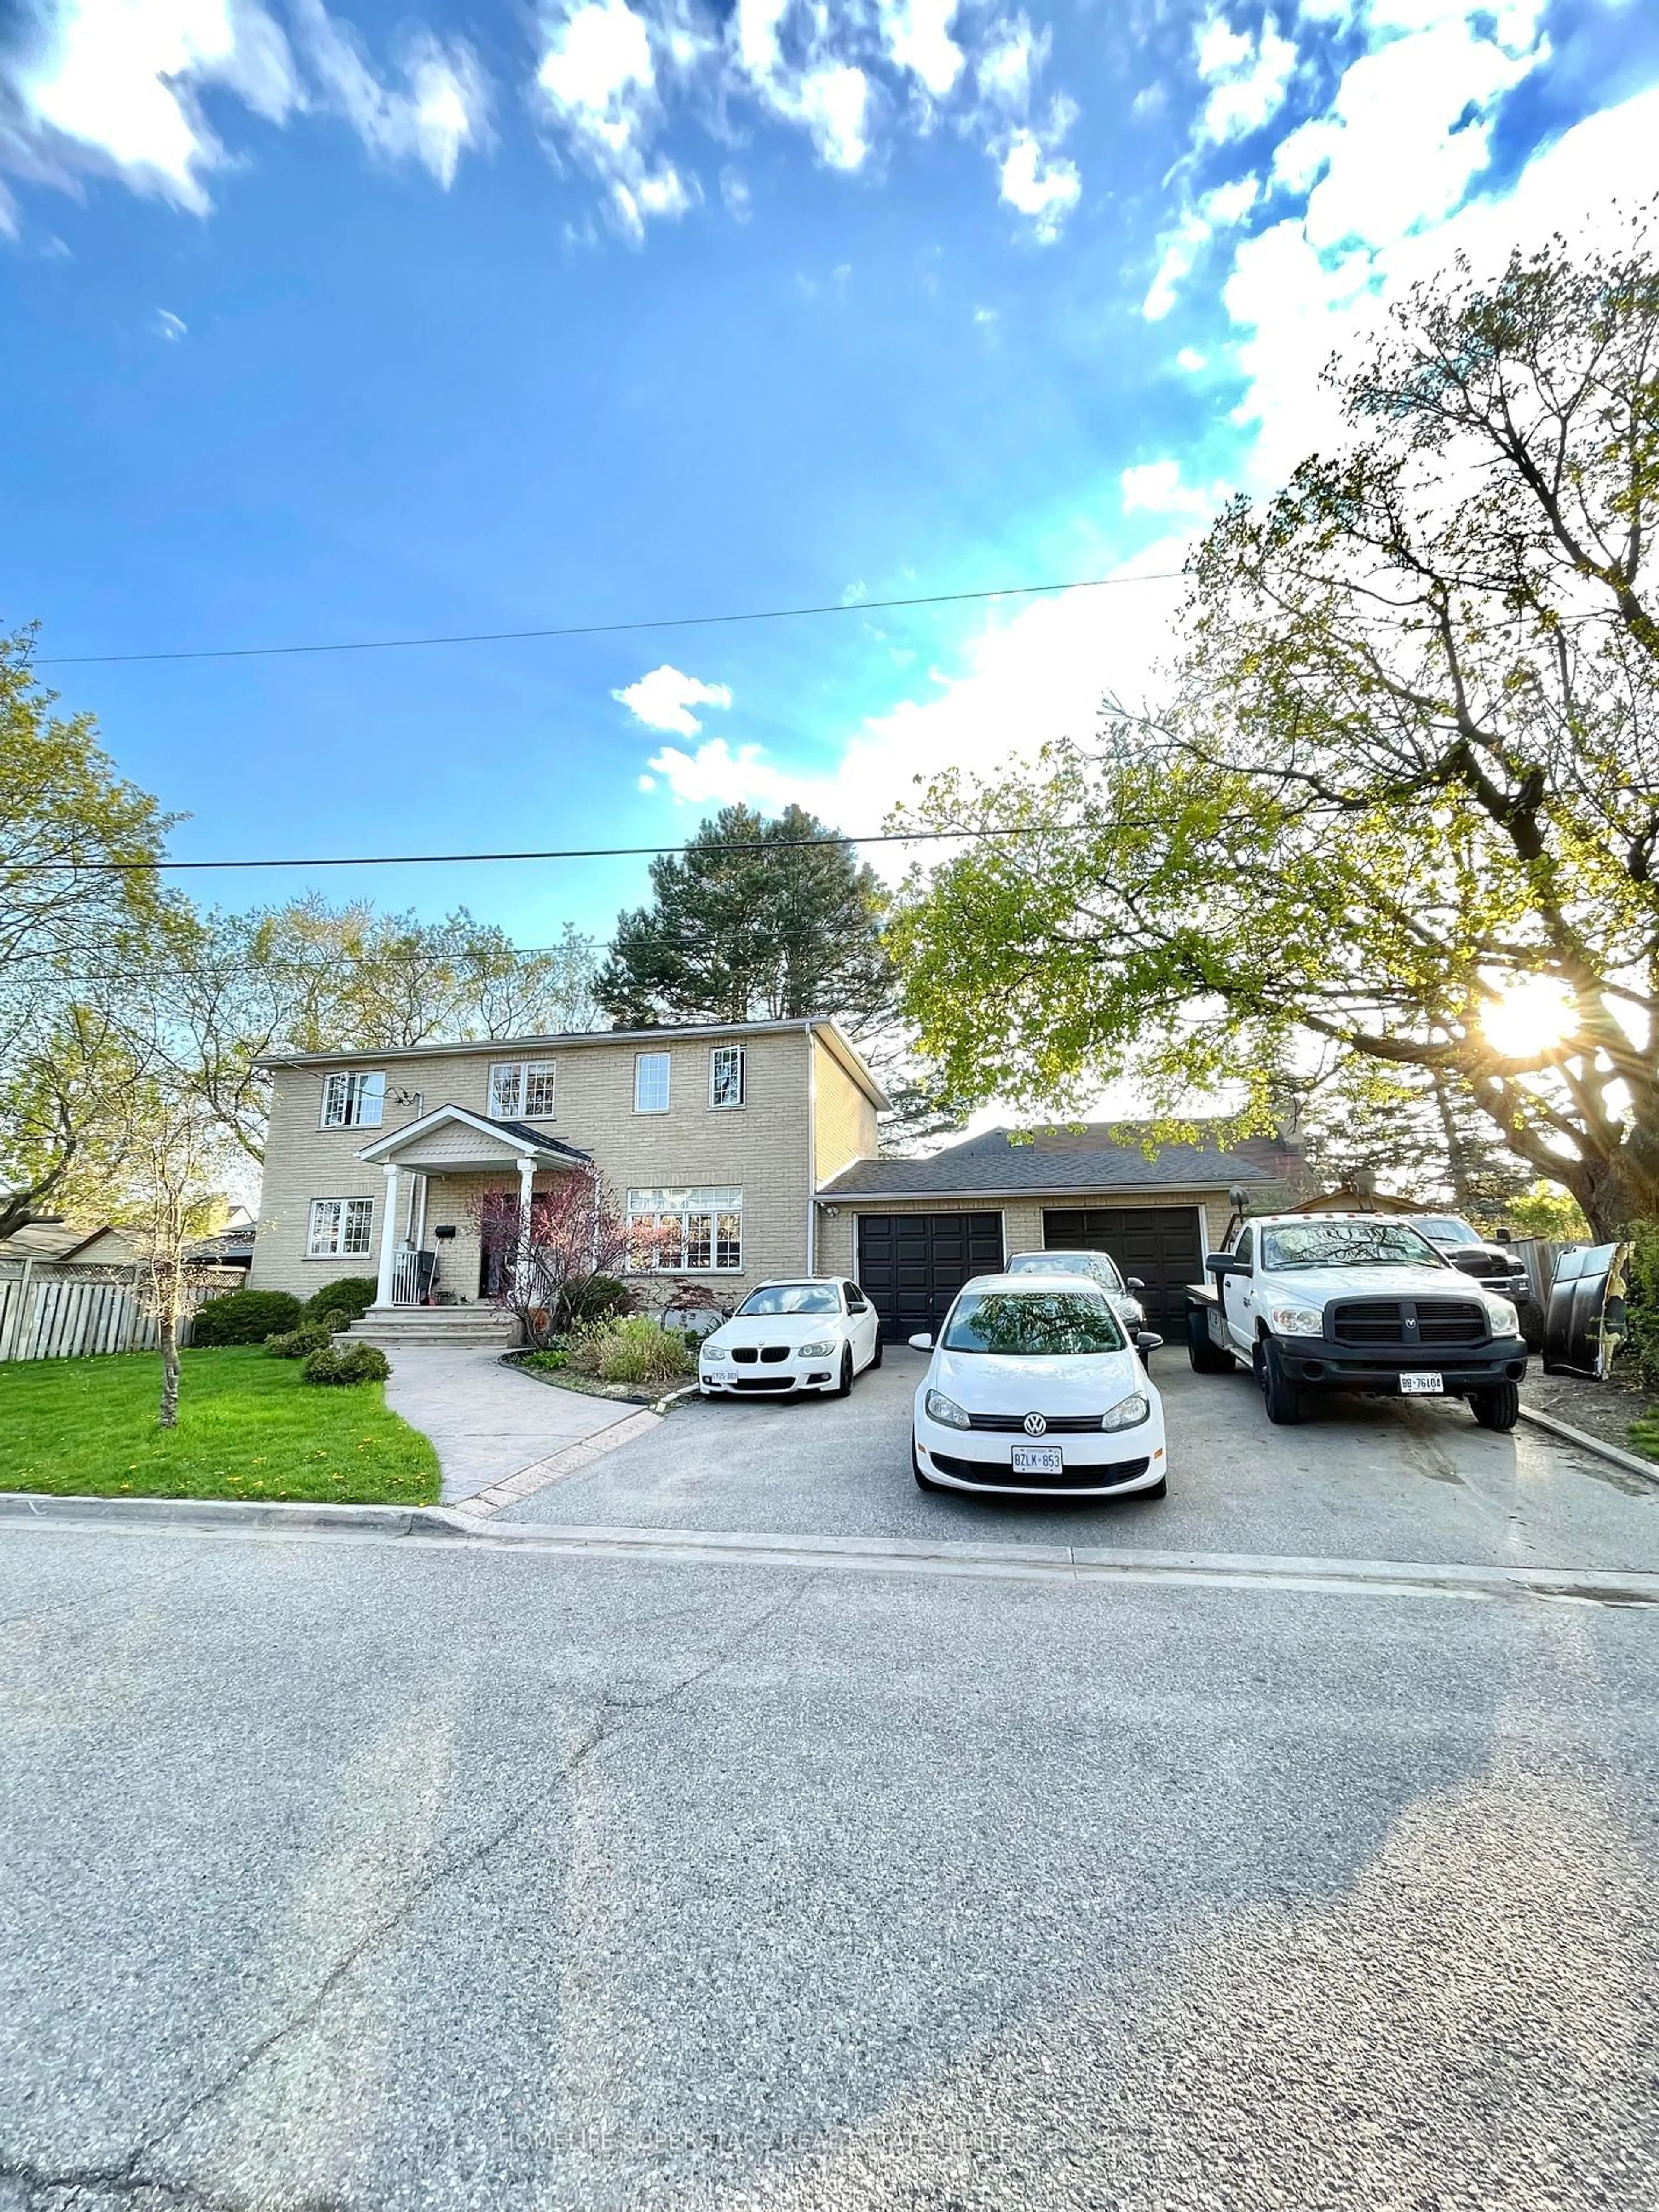 Street view for 47 Harlow Cres, Toronto Ontario M9V 2Y7